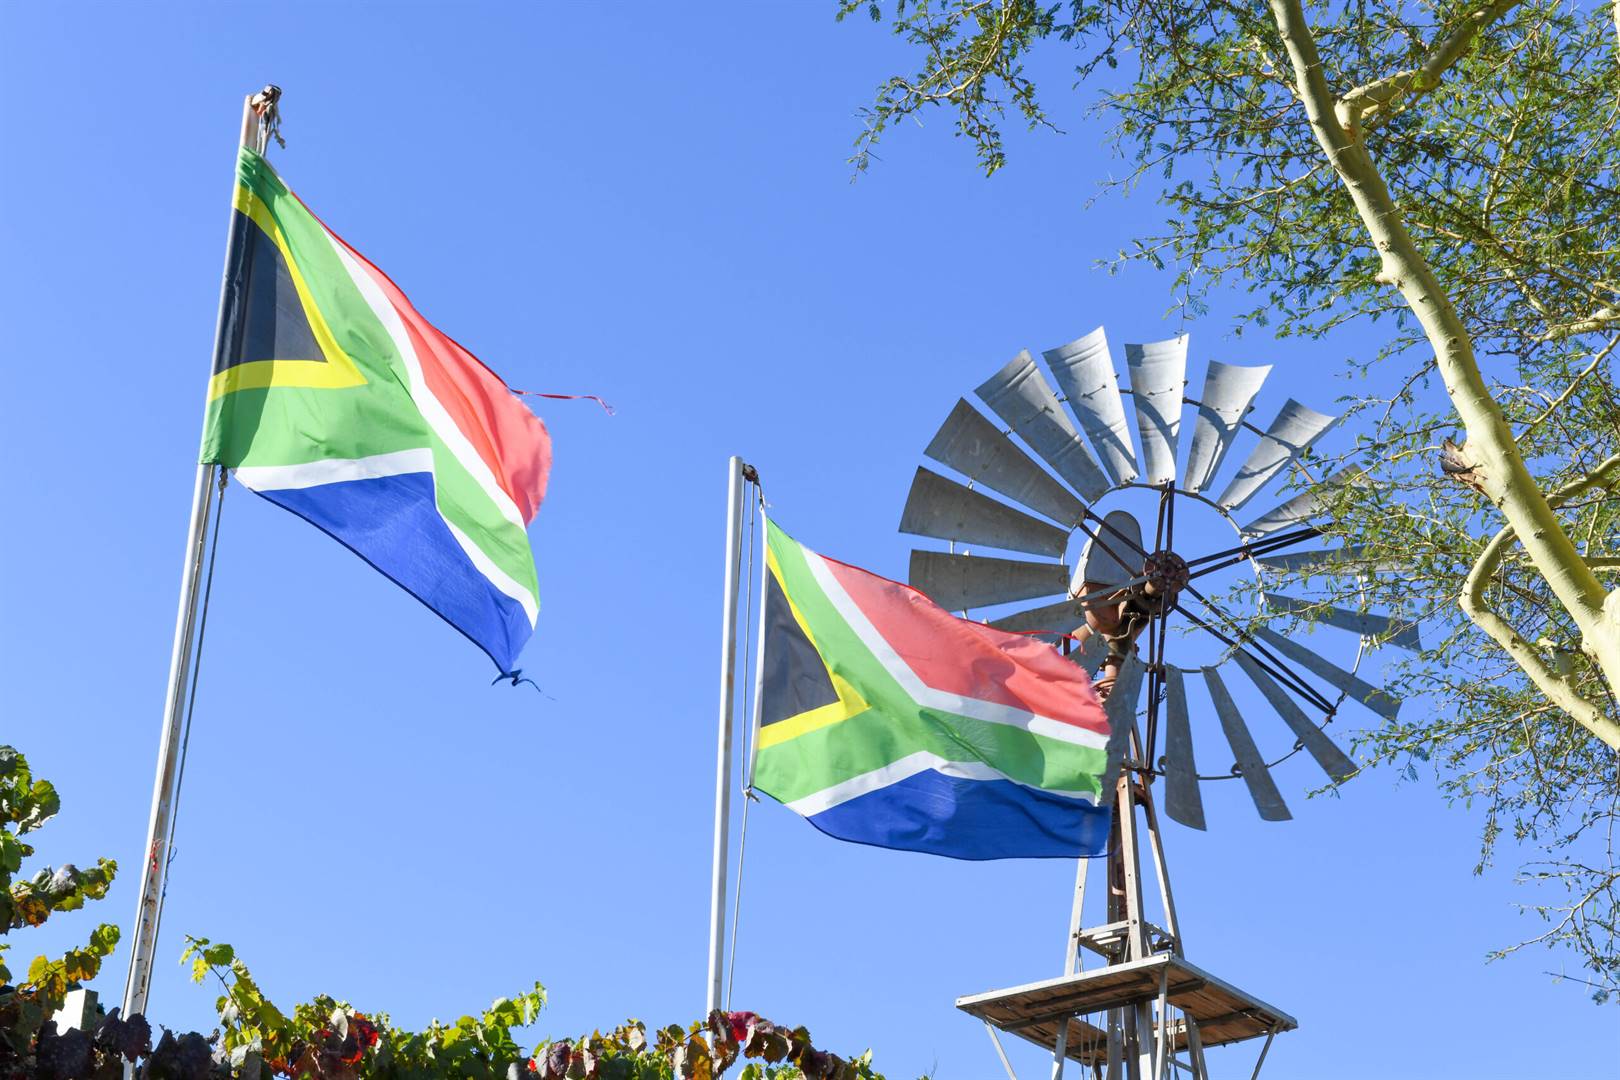 A new South African law passed on 7 December criminalises broad categories of speech, including potential peaceful expression.Photo: Bigstock